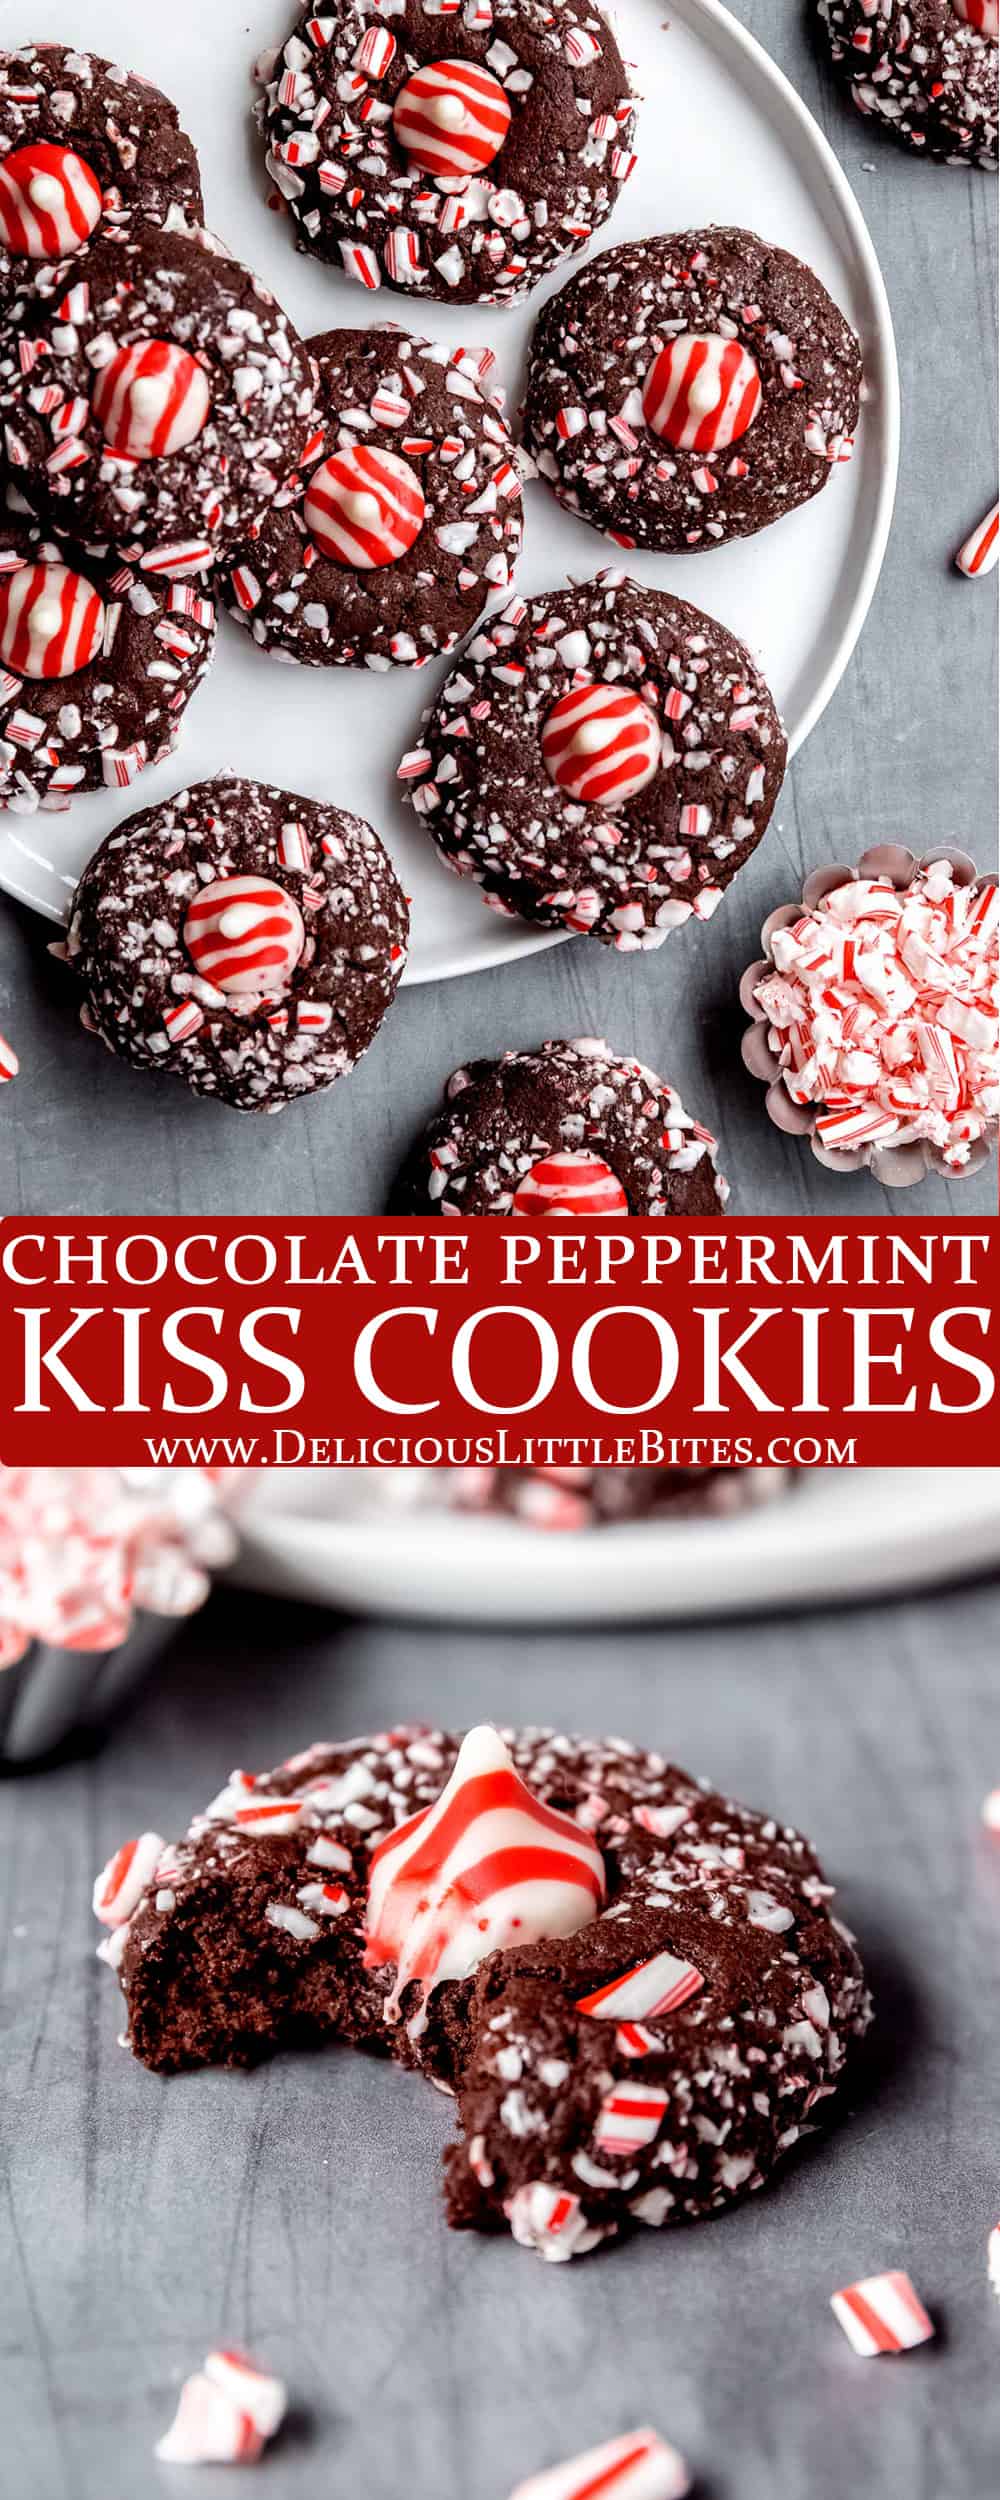 Chocolate Peppermint Kiss Cookies - Delicious Little Bites